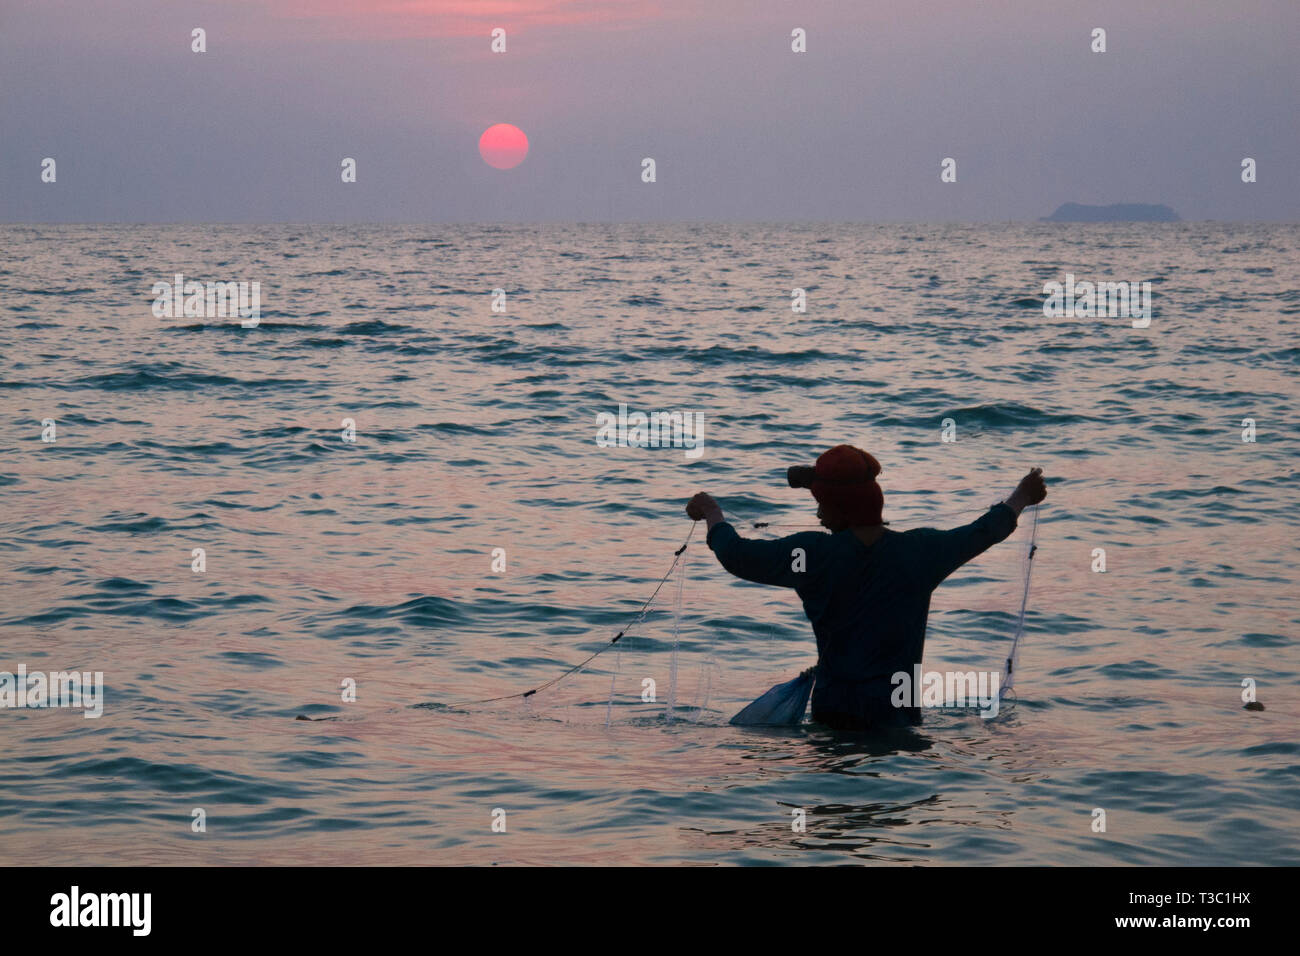 A man is fishing in the sunset, Koh Lanta, Thailand. Stock Photo